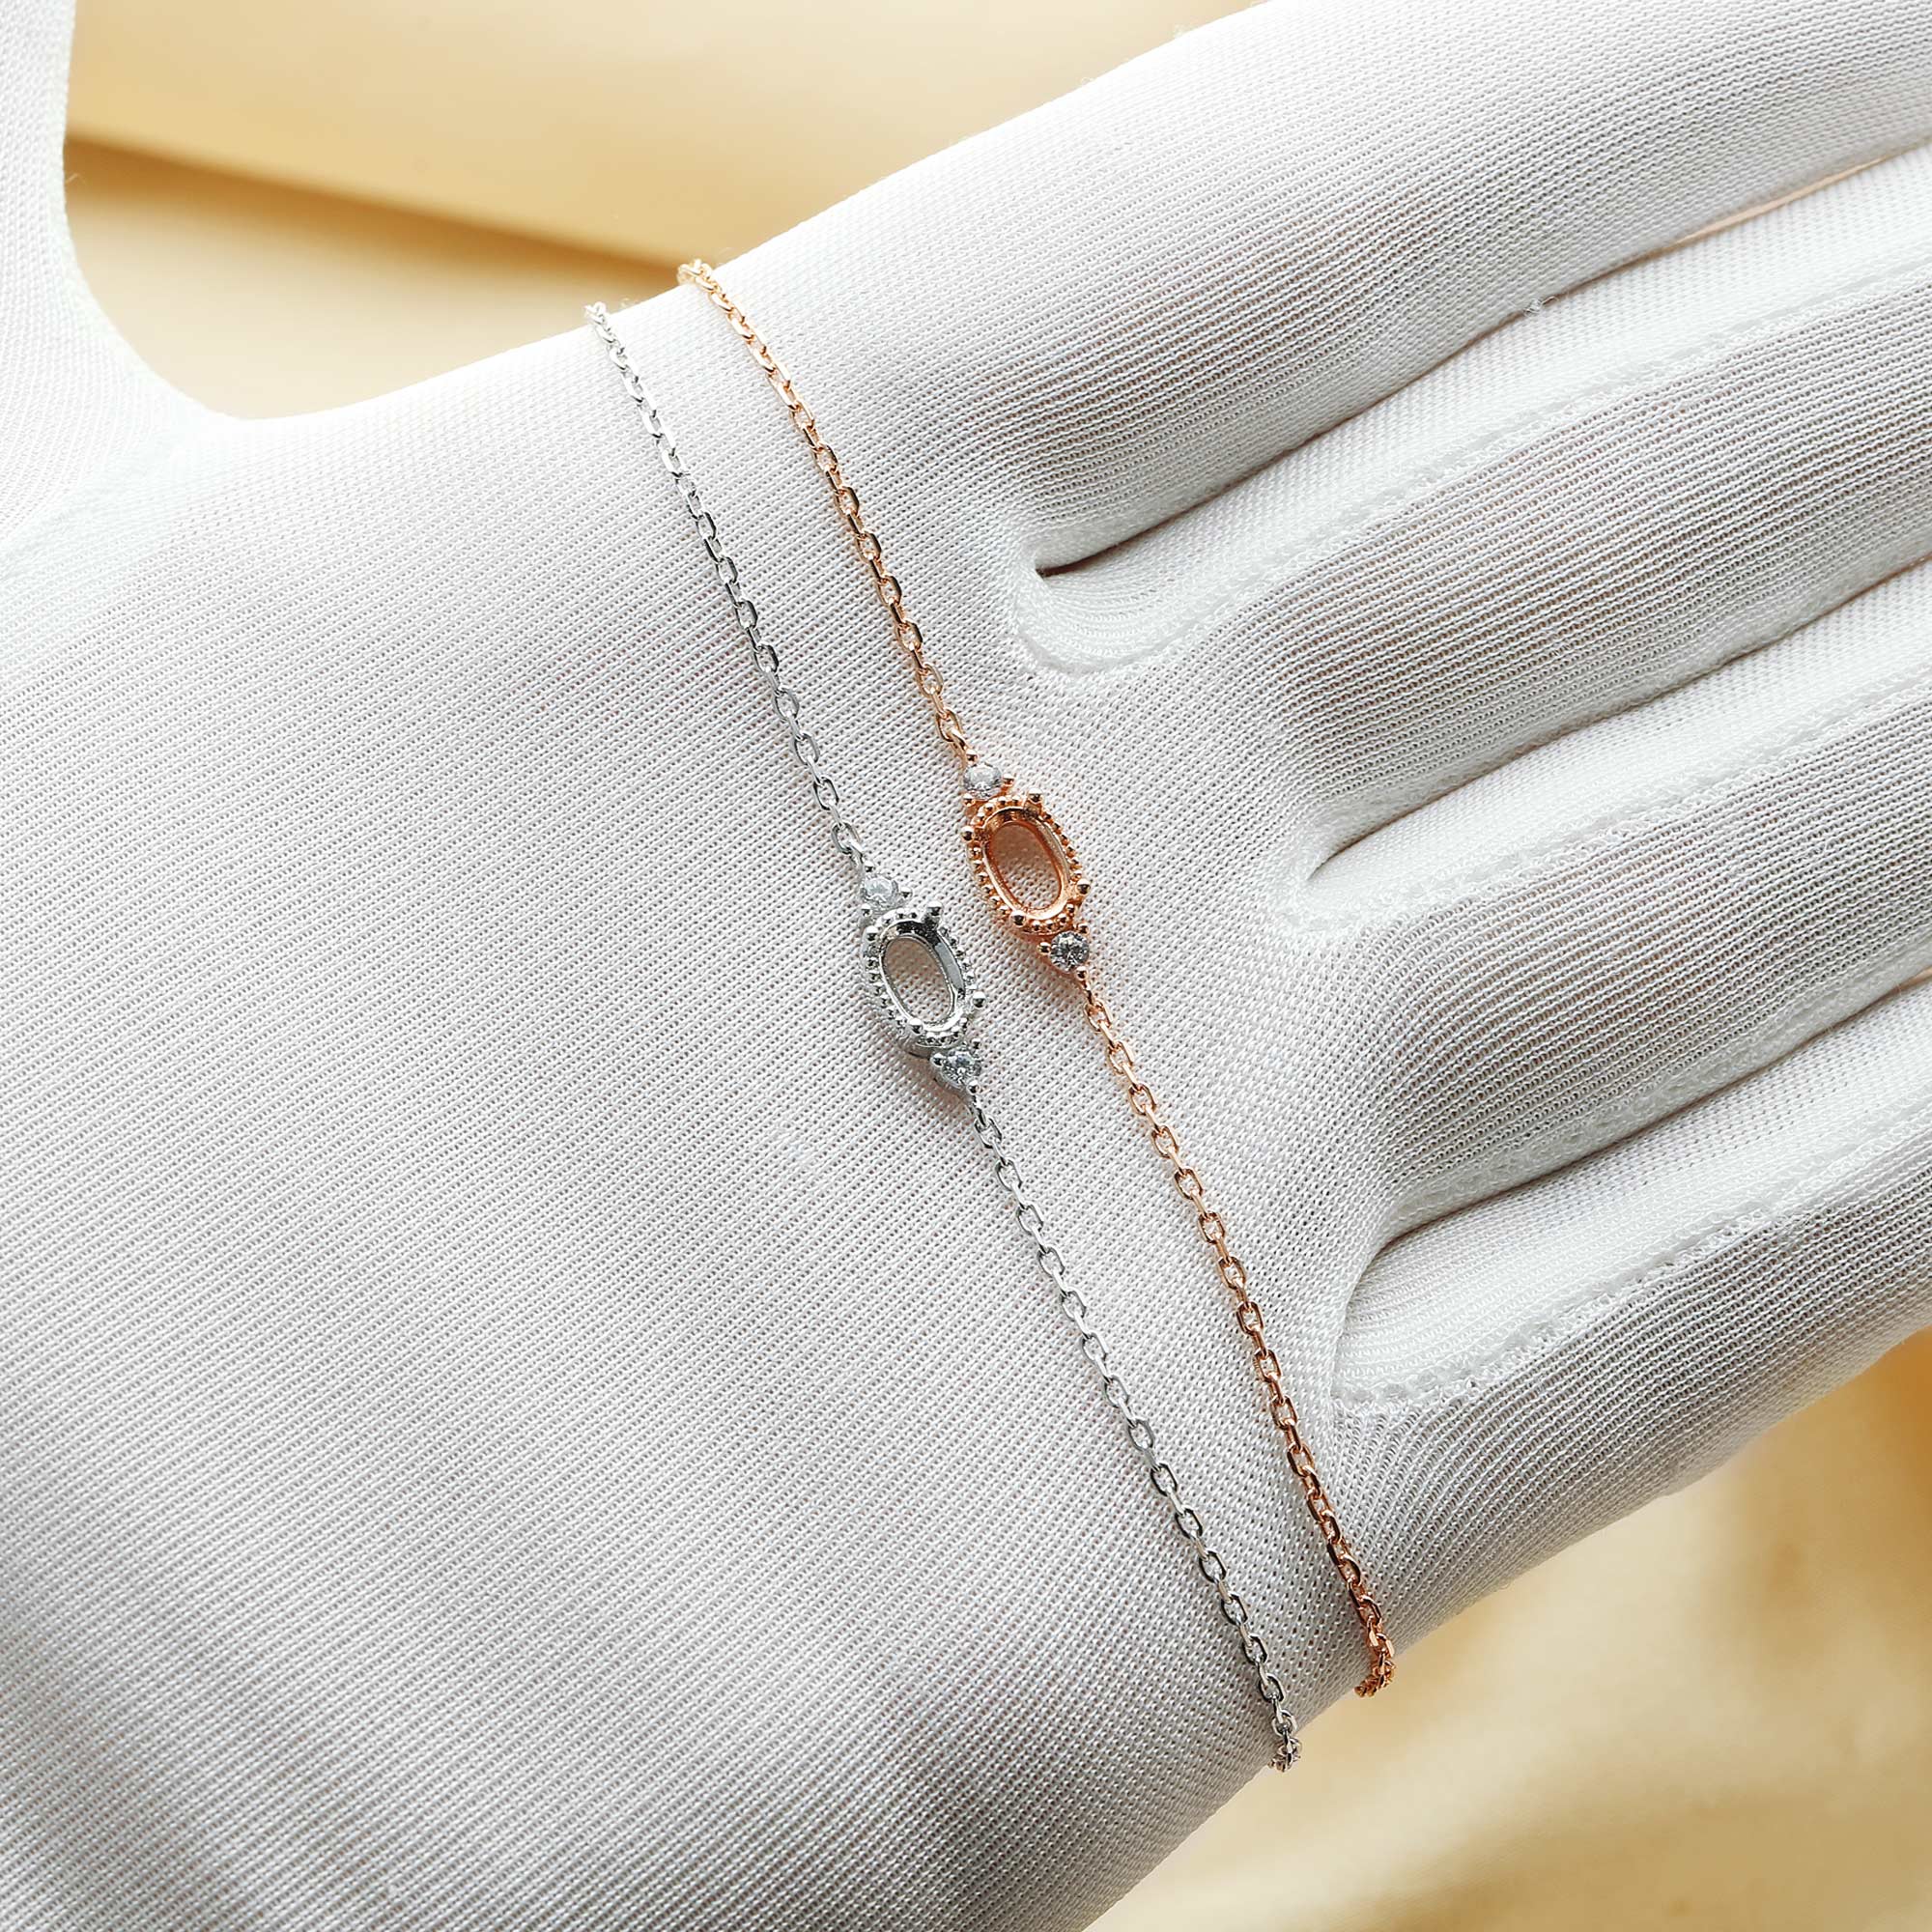 4x6MM Oval Prong Bezel Bracelet Settings,Three Stone Solid 925 Sterling Silver Rose Gold Plated Bracelet,DIY Bracelet Tray With Chain 6''+1'' 1900287 - Click Image to Close